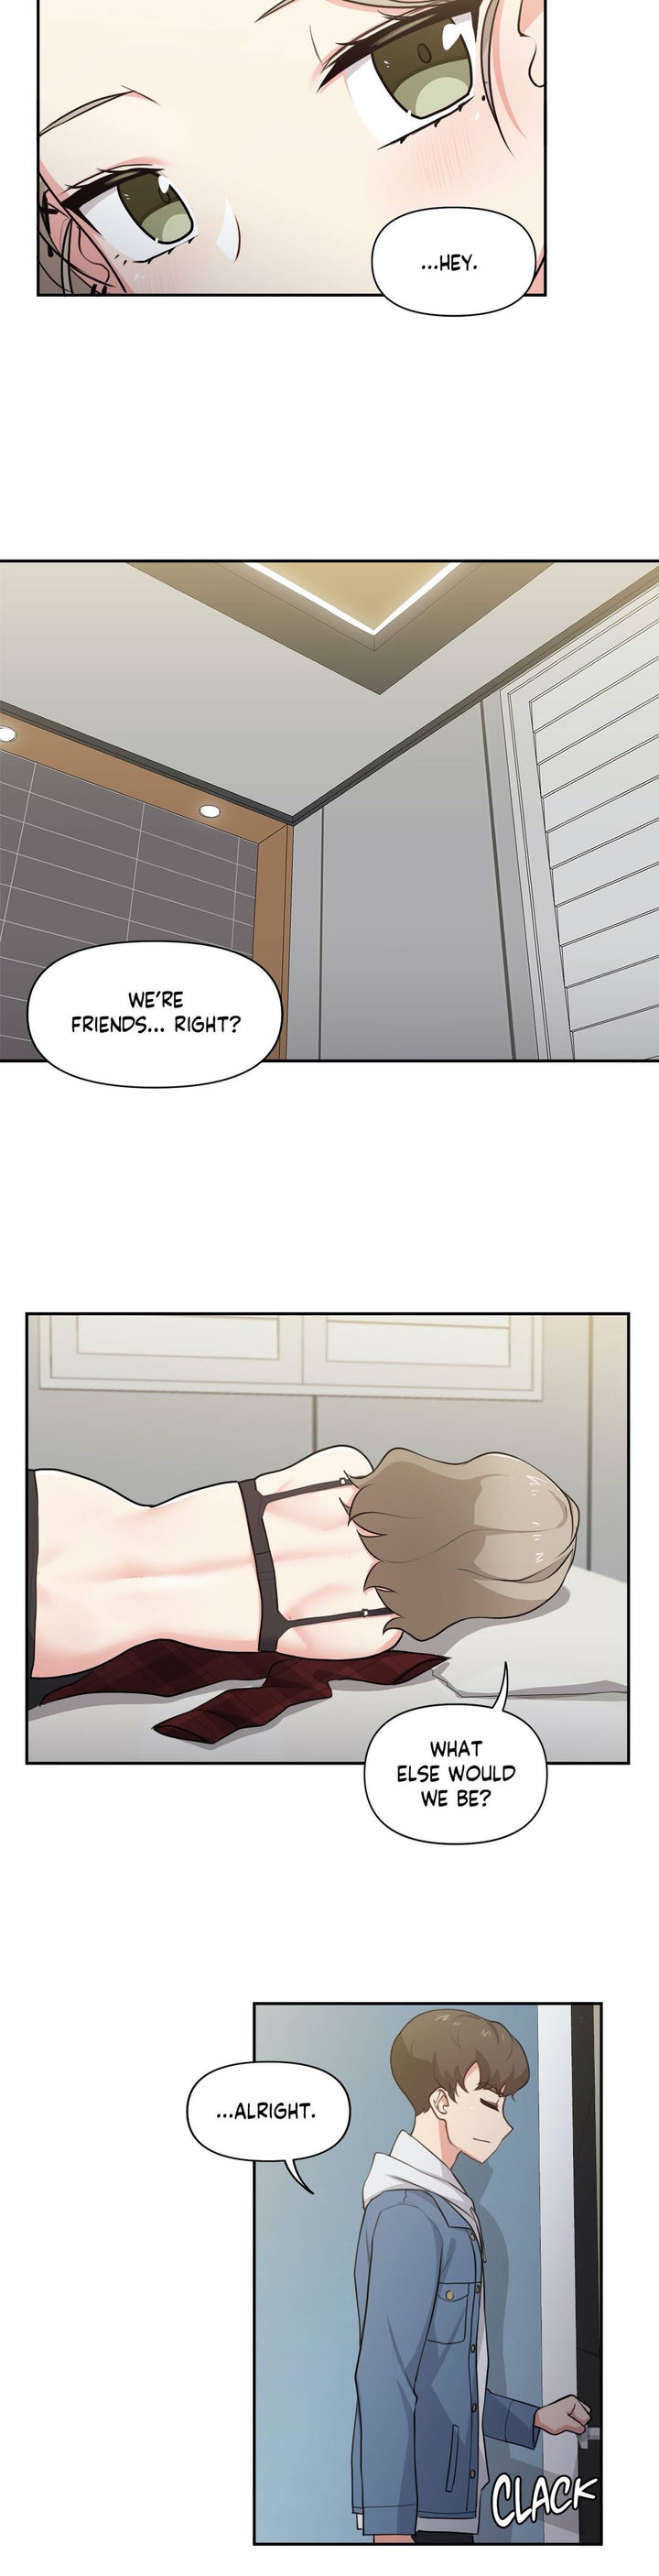 Friends or F-Buddies - Chapter 5 Page 16